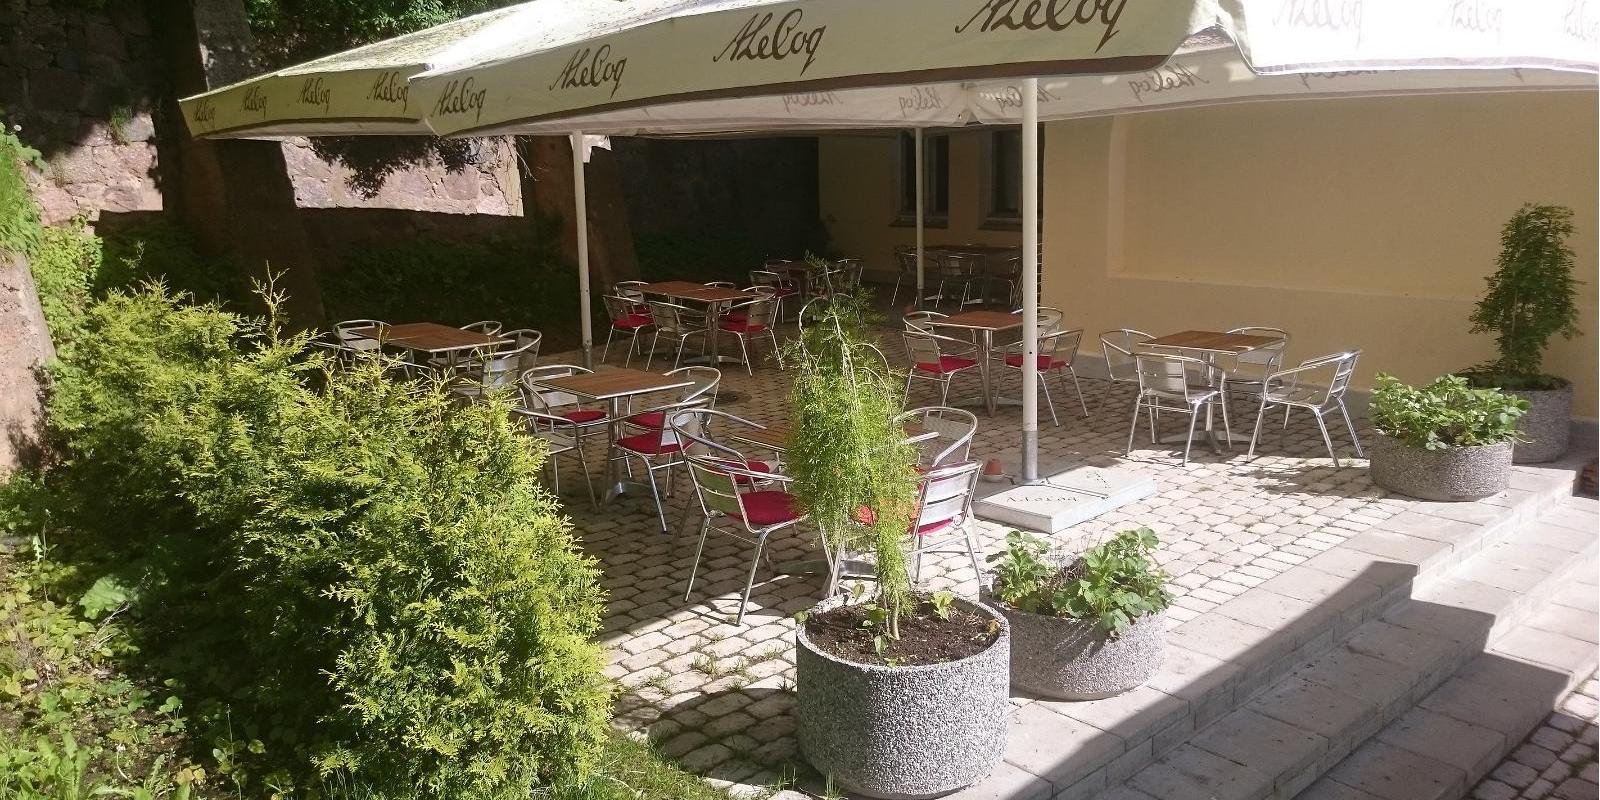 Restaurant Spargel and lush green outdoor terrace